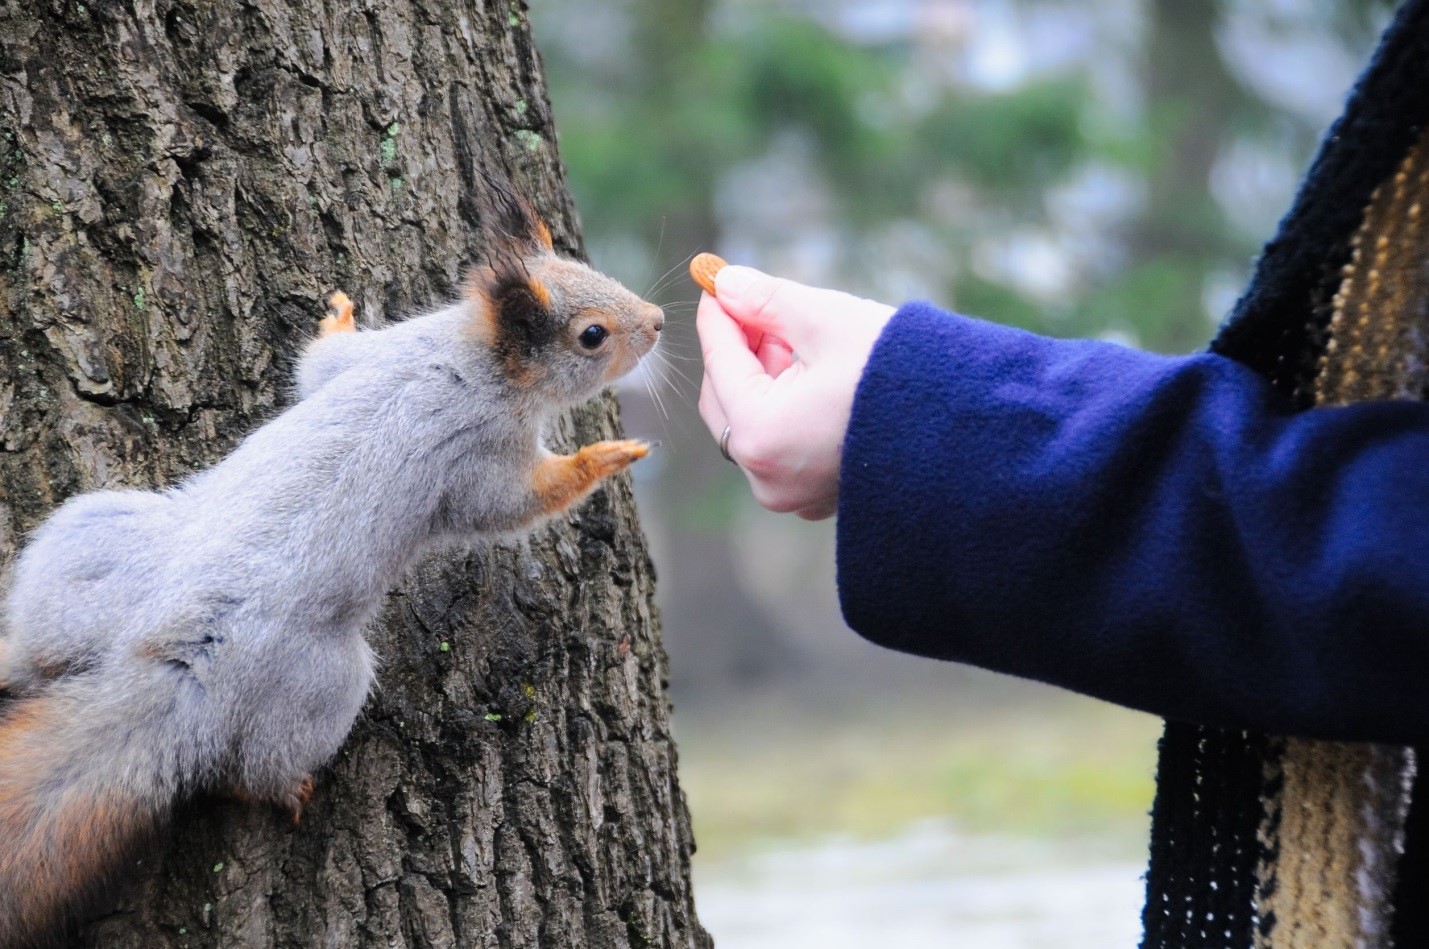 Squirrels are carriers of disease (but not to humans)